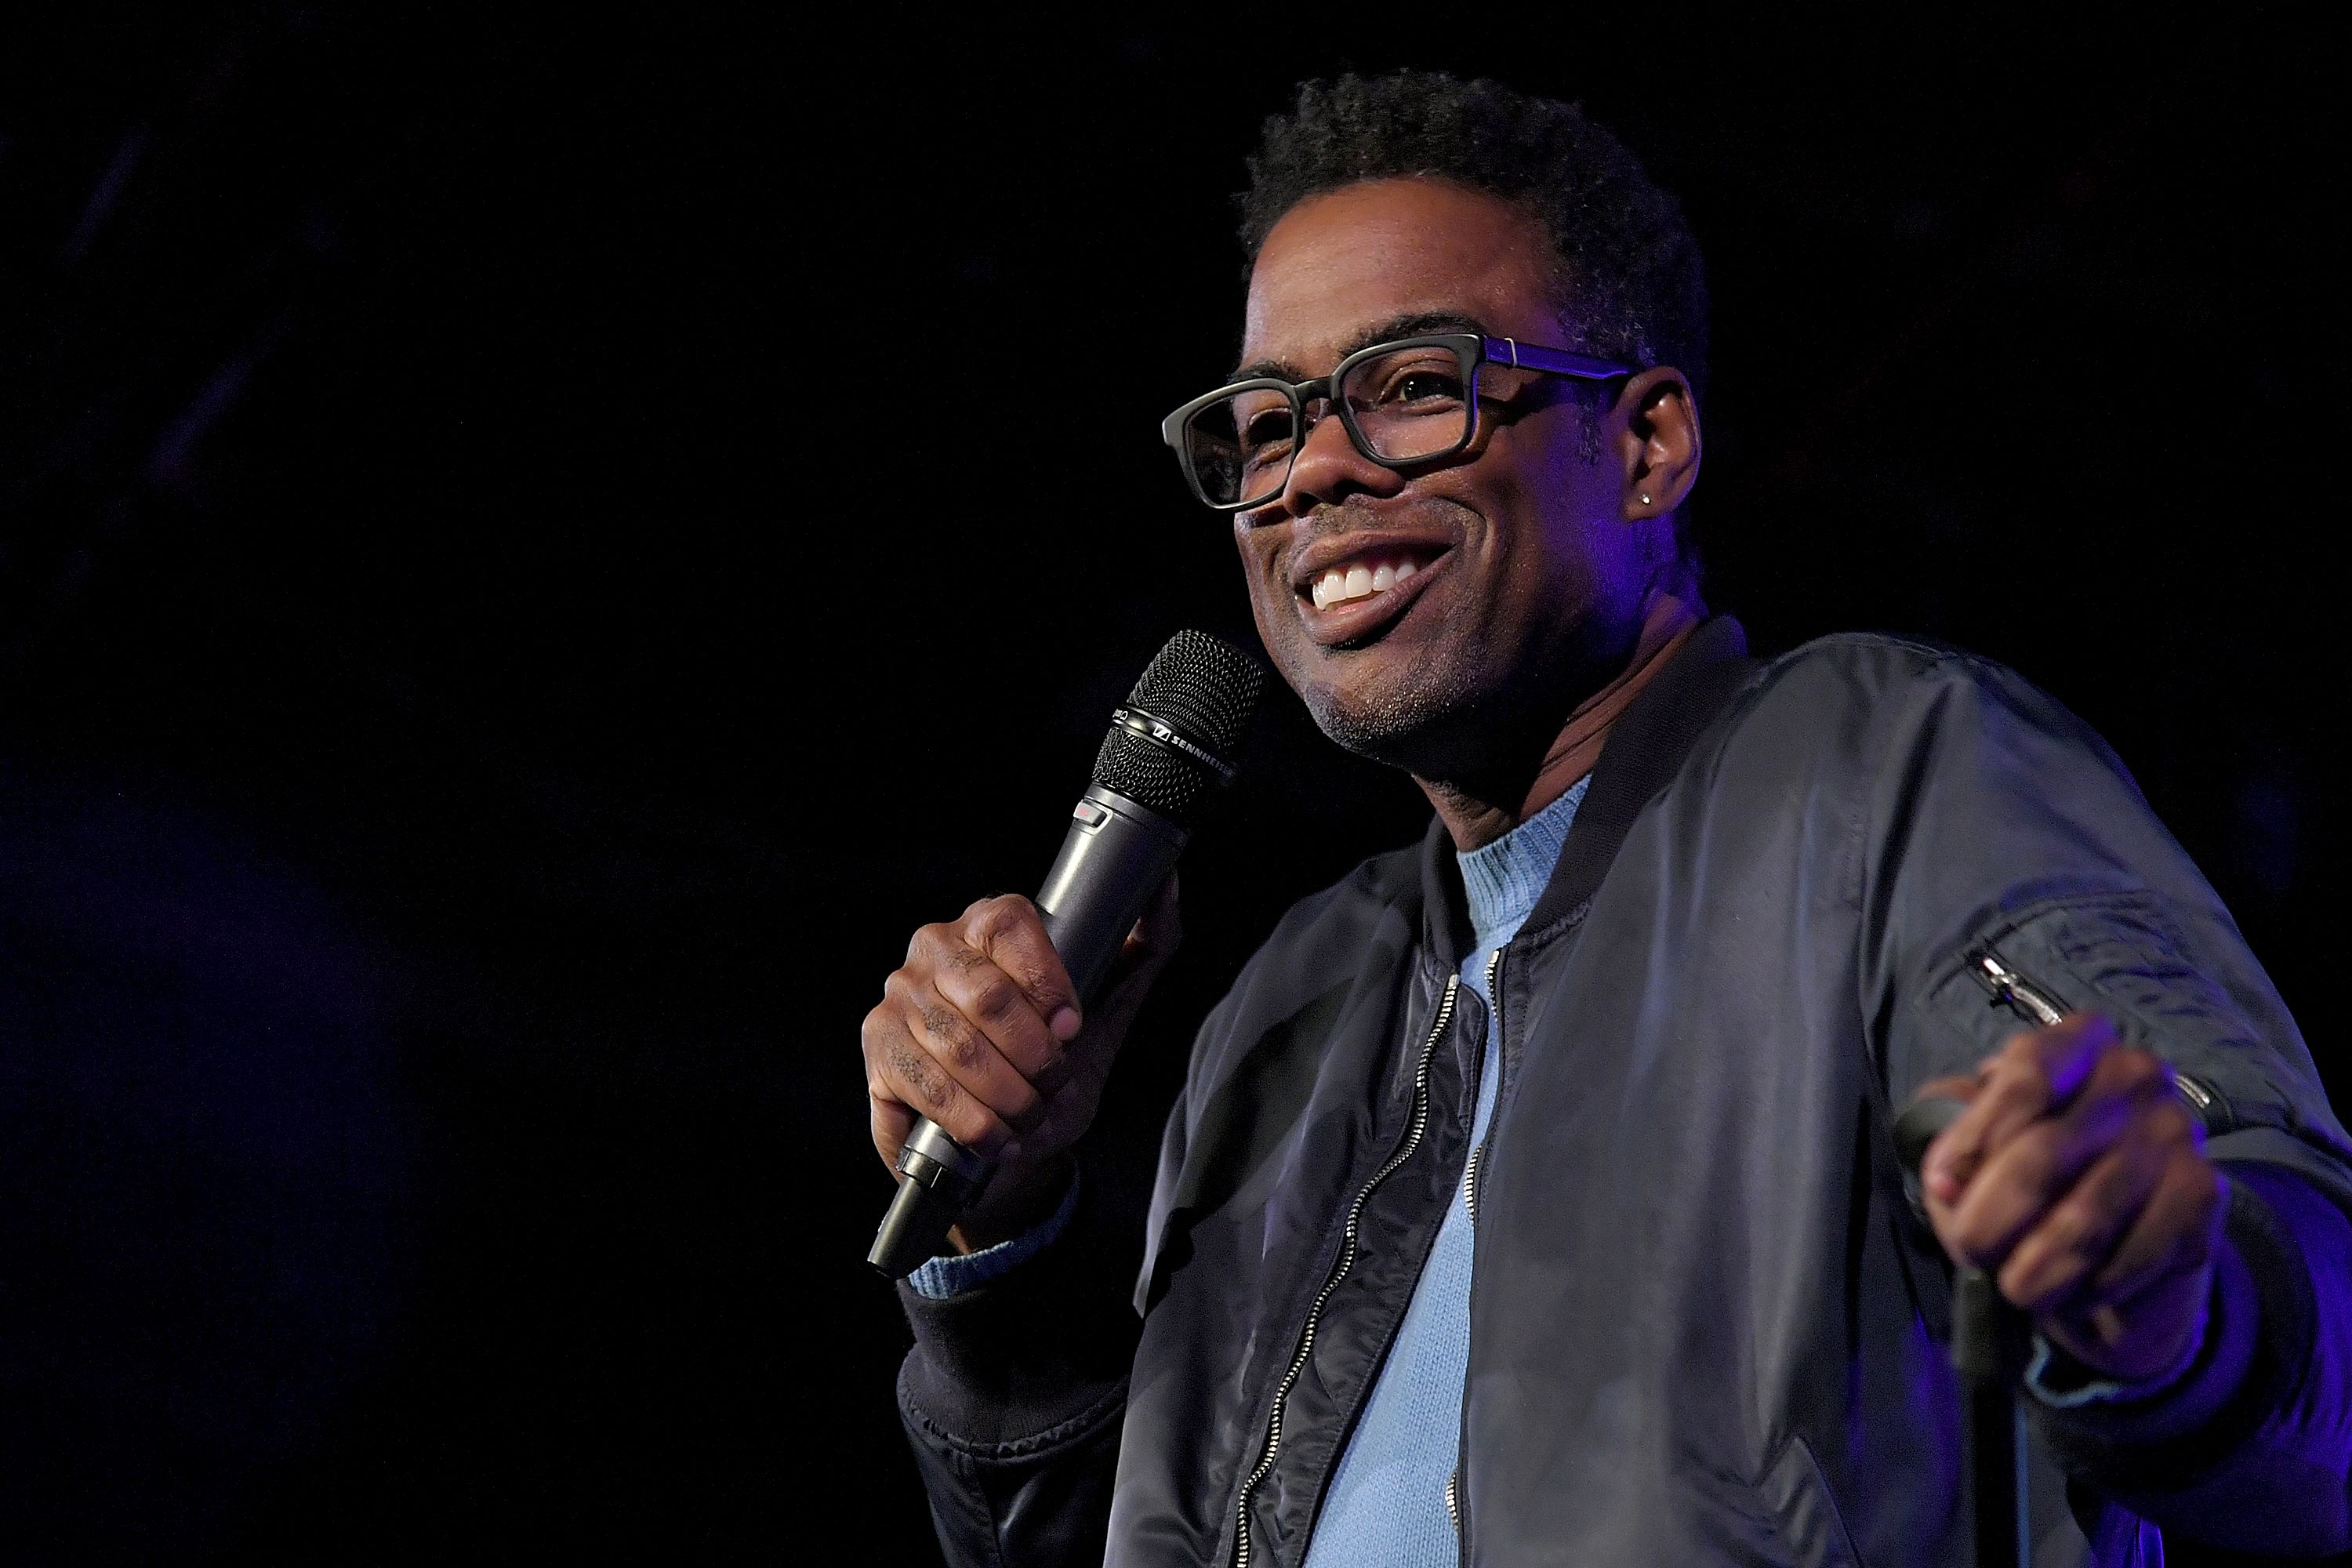 Chris Rock with microphone